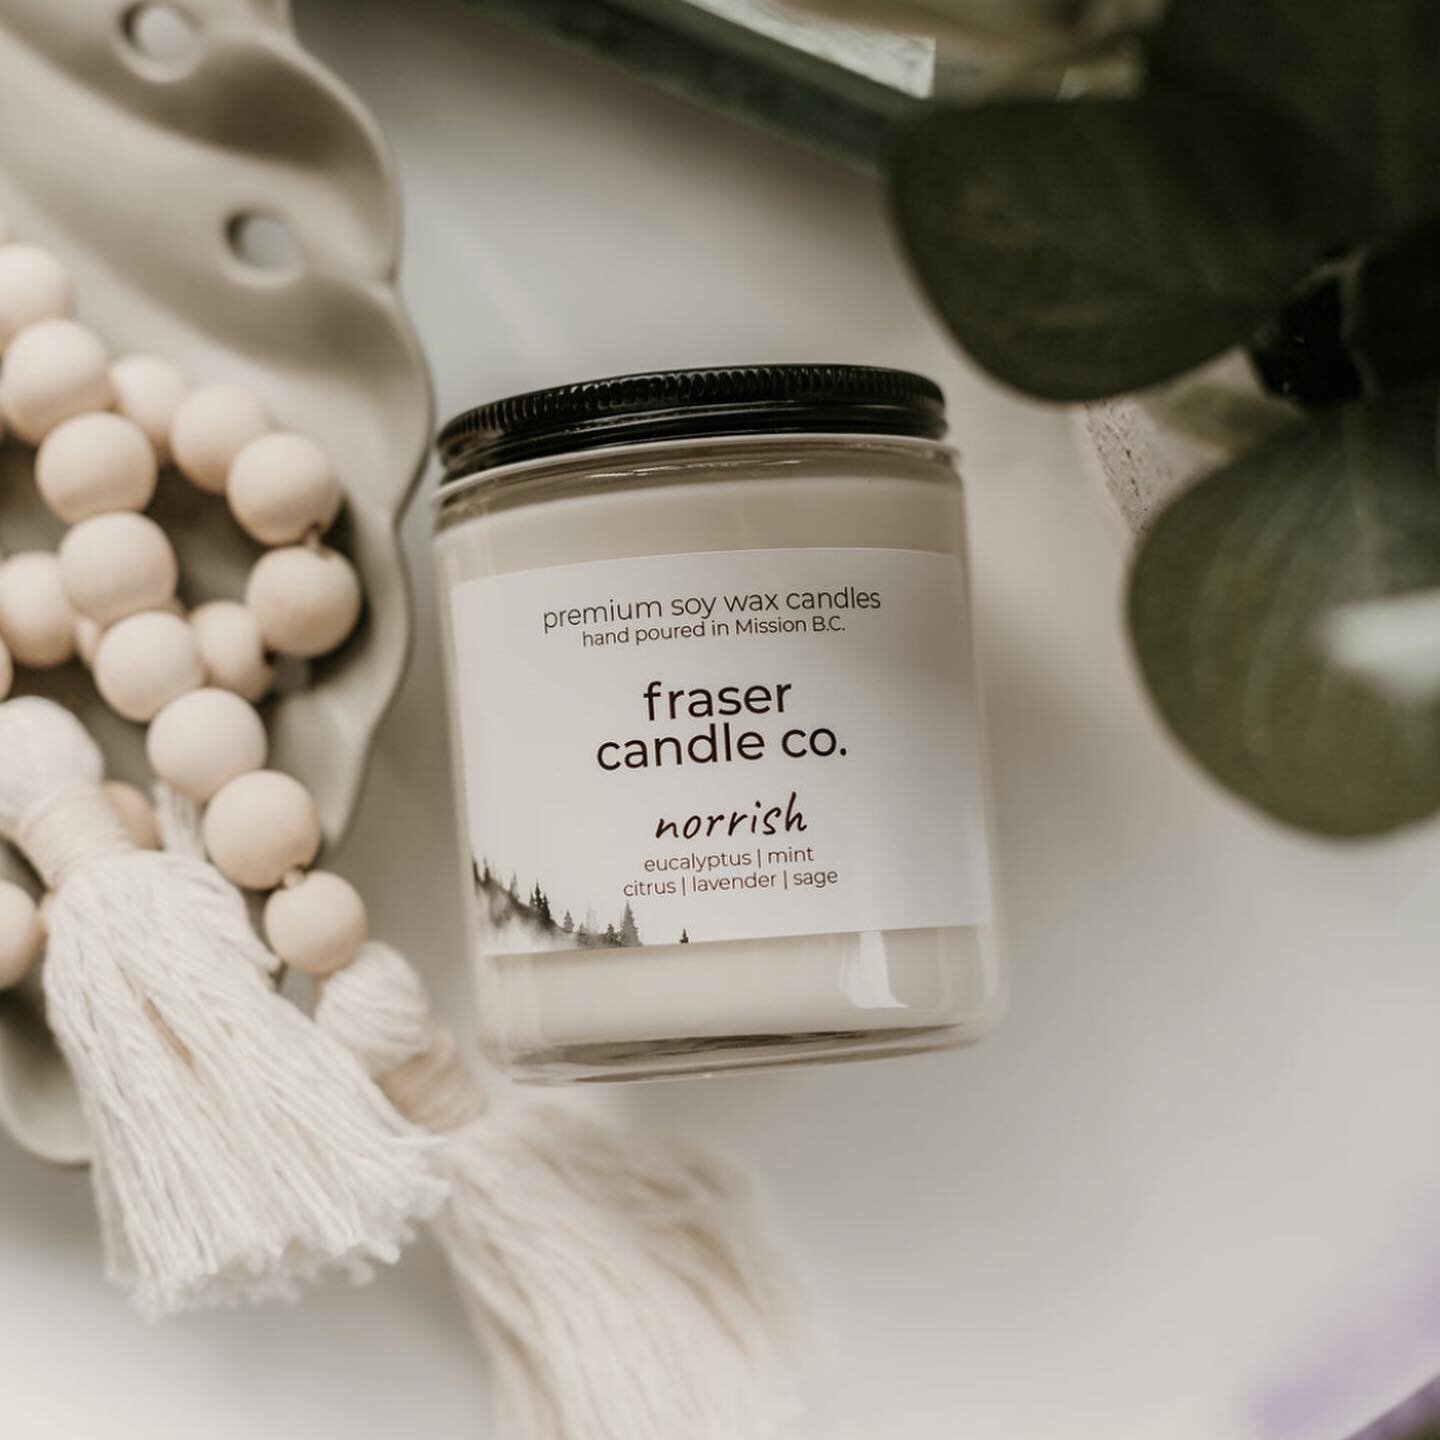 We can&rsquo;t wait to have @frasercandleco back at the market! Find expertly blended candles and fragrances made here in mission 💛

June 2 is coming up quick!